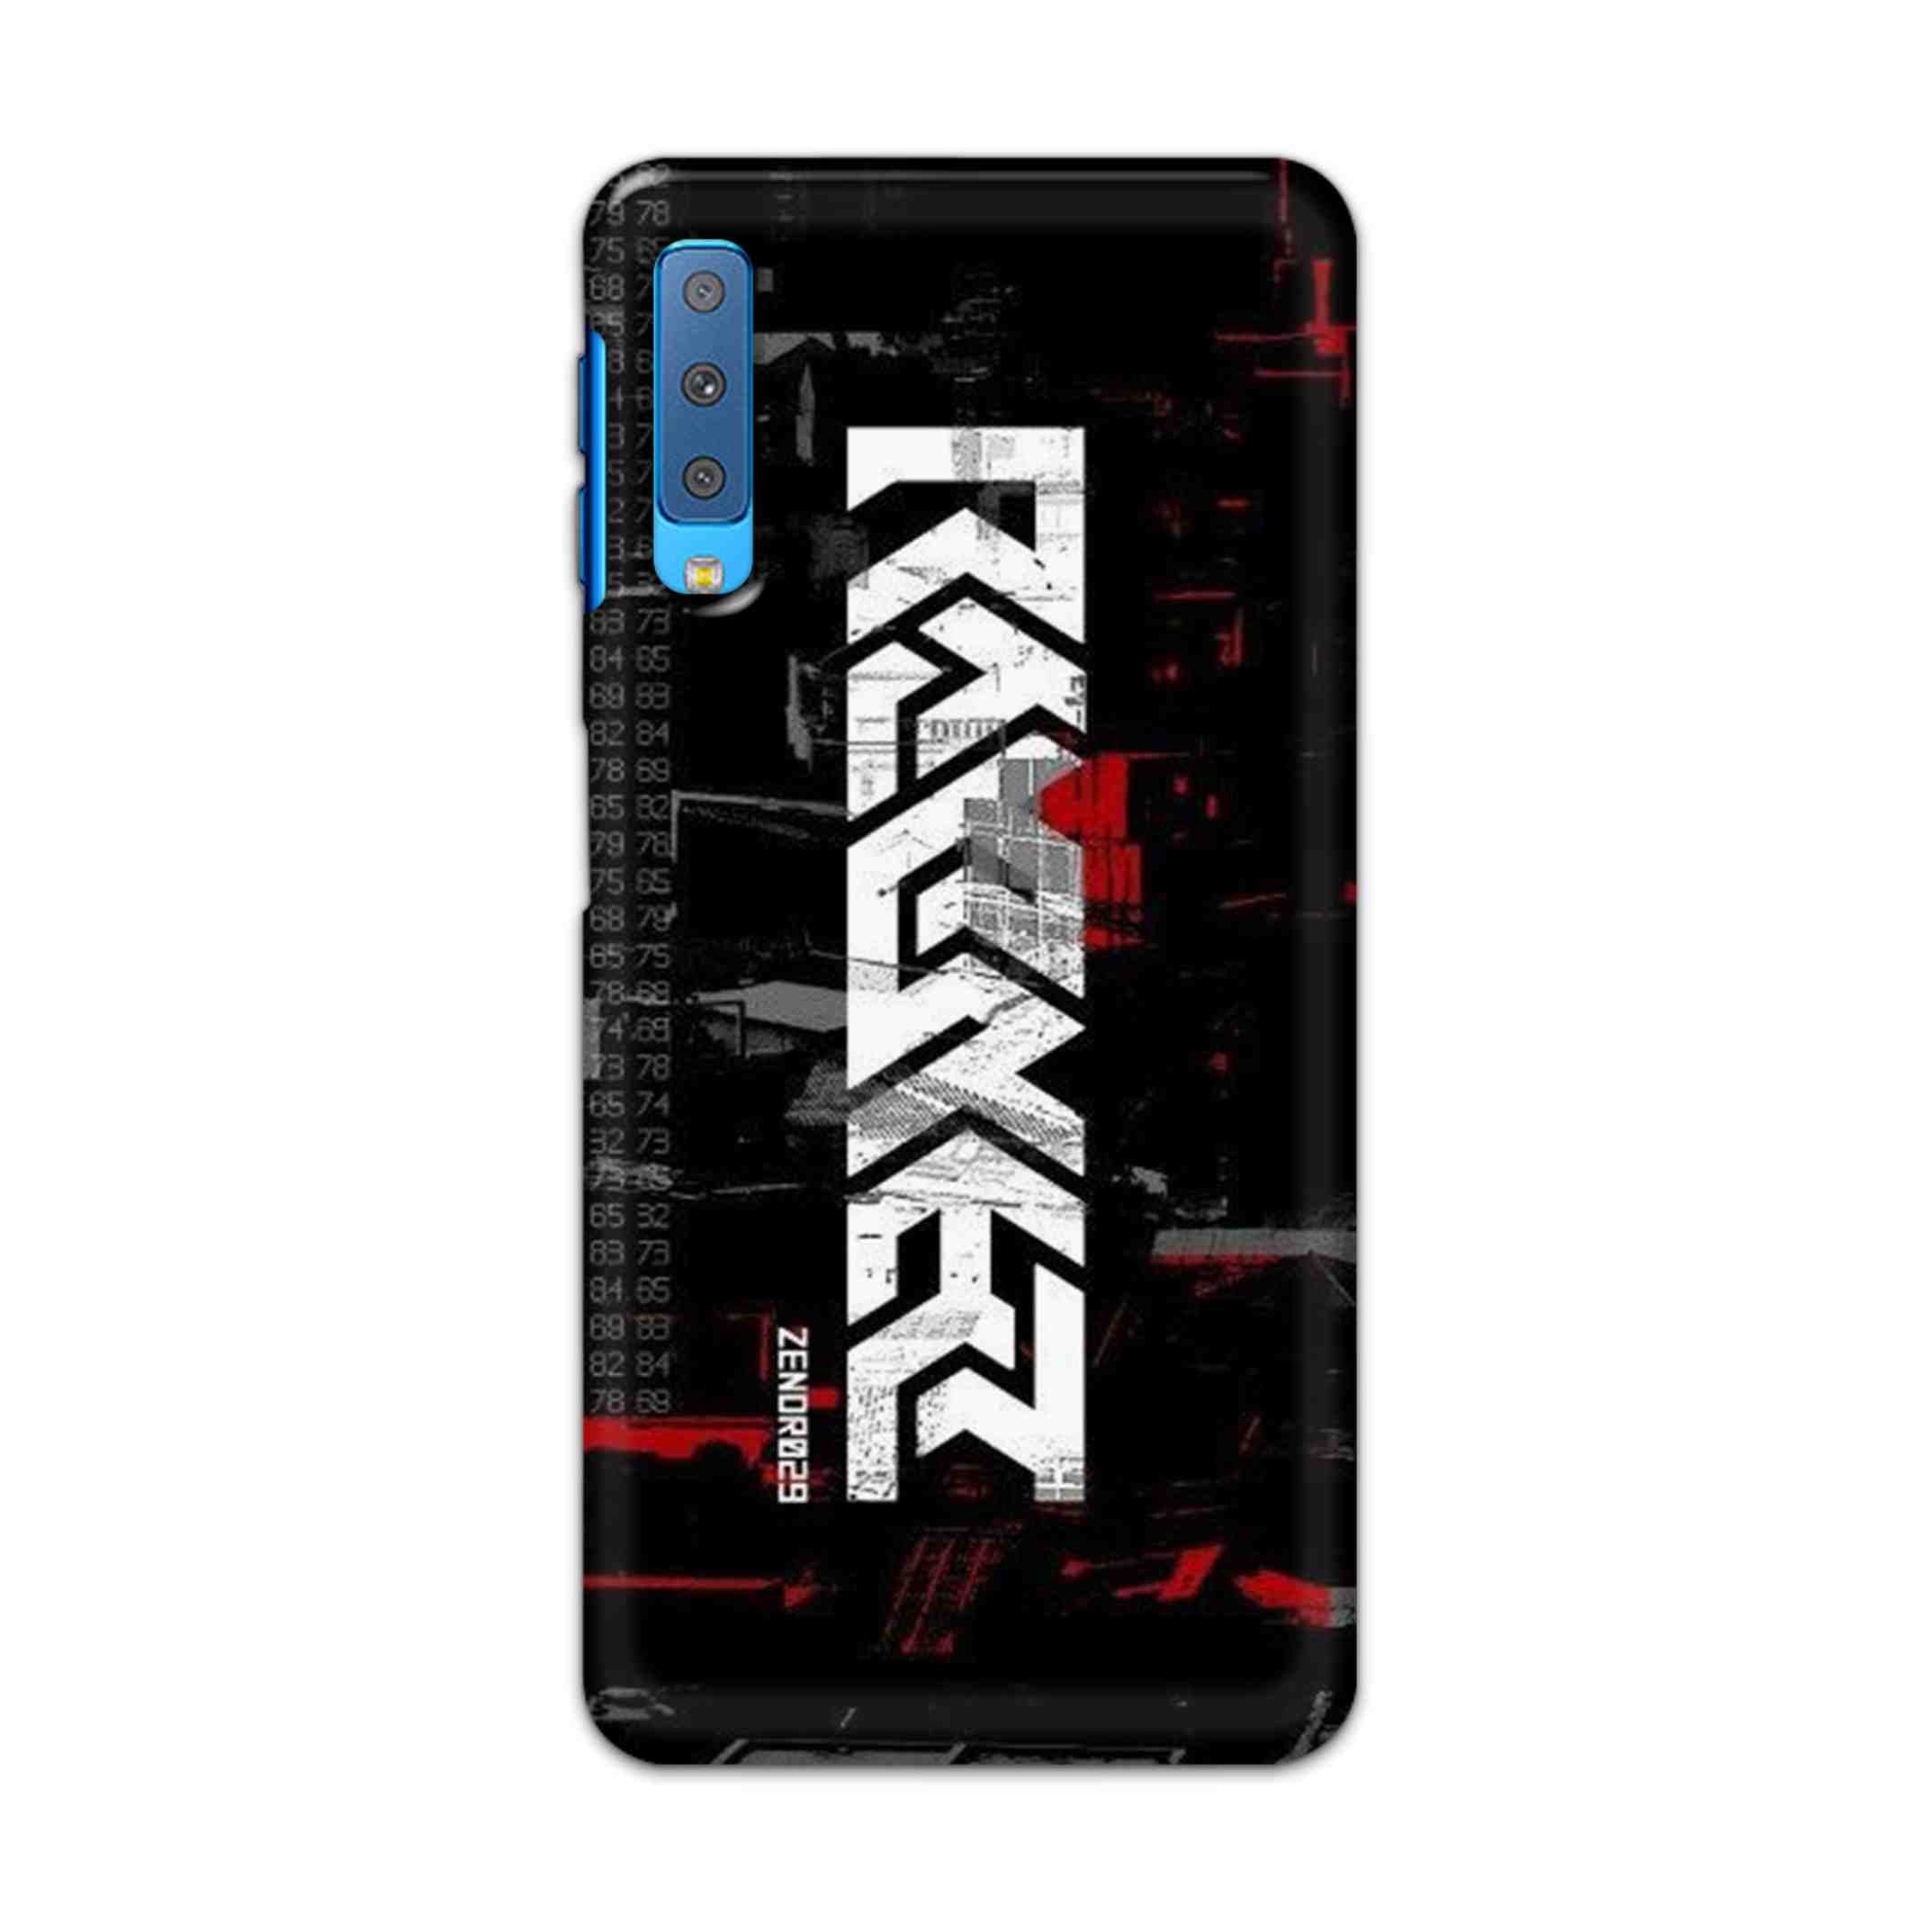 Buy Raxer Hard Back Mobile Phone Case Cover For Samsung Galaxy A7 2018 Online